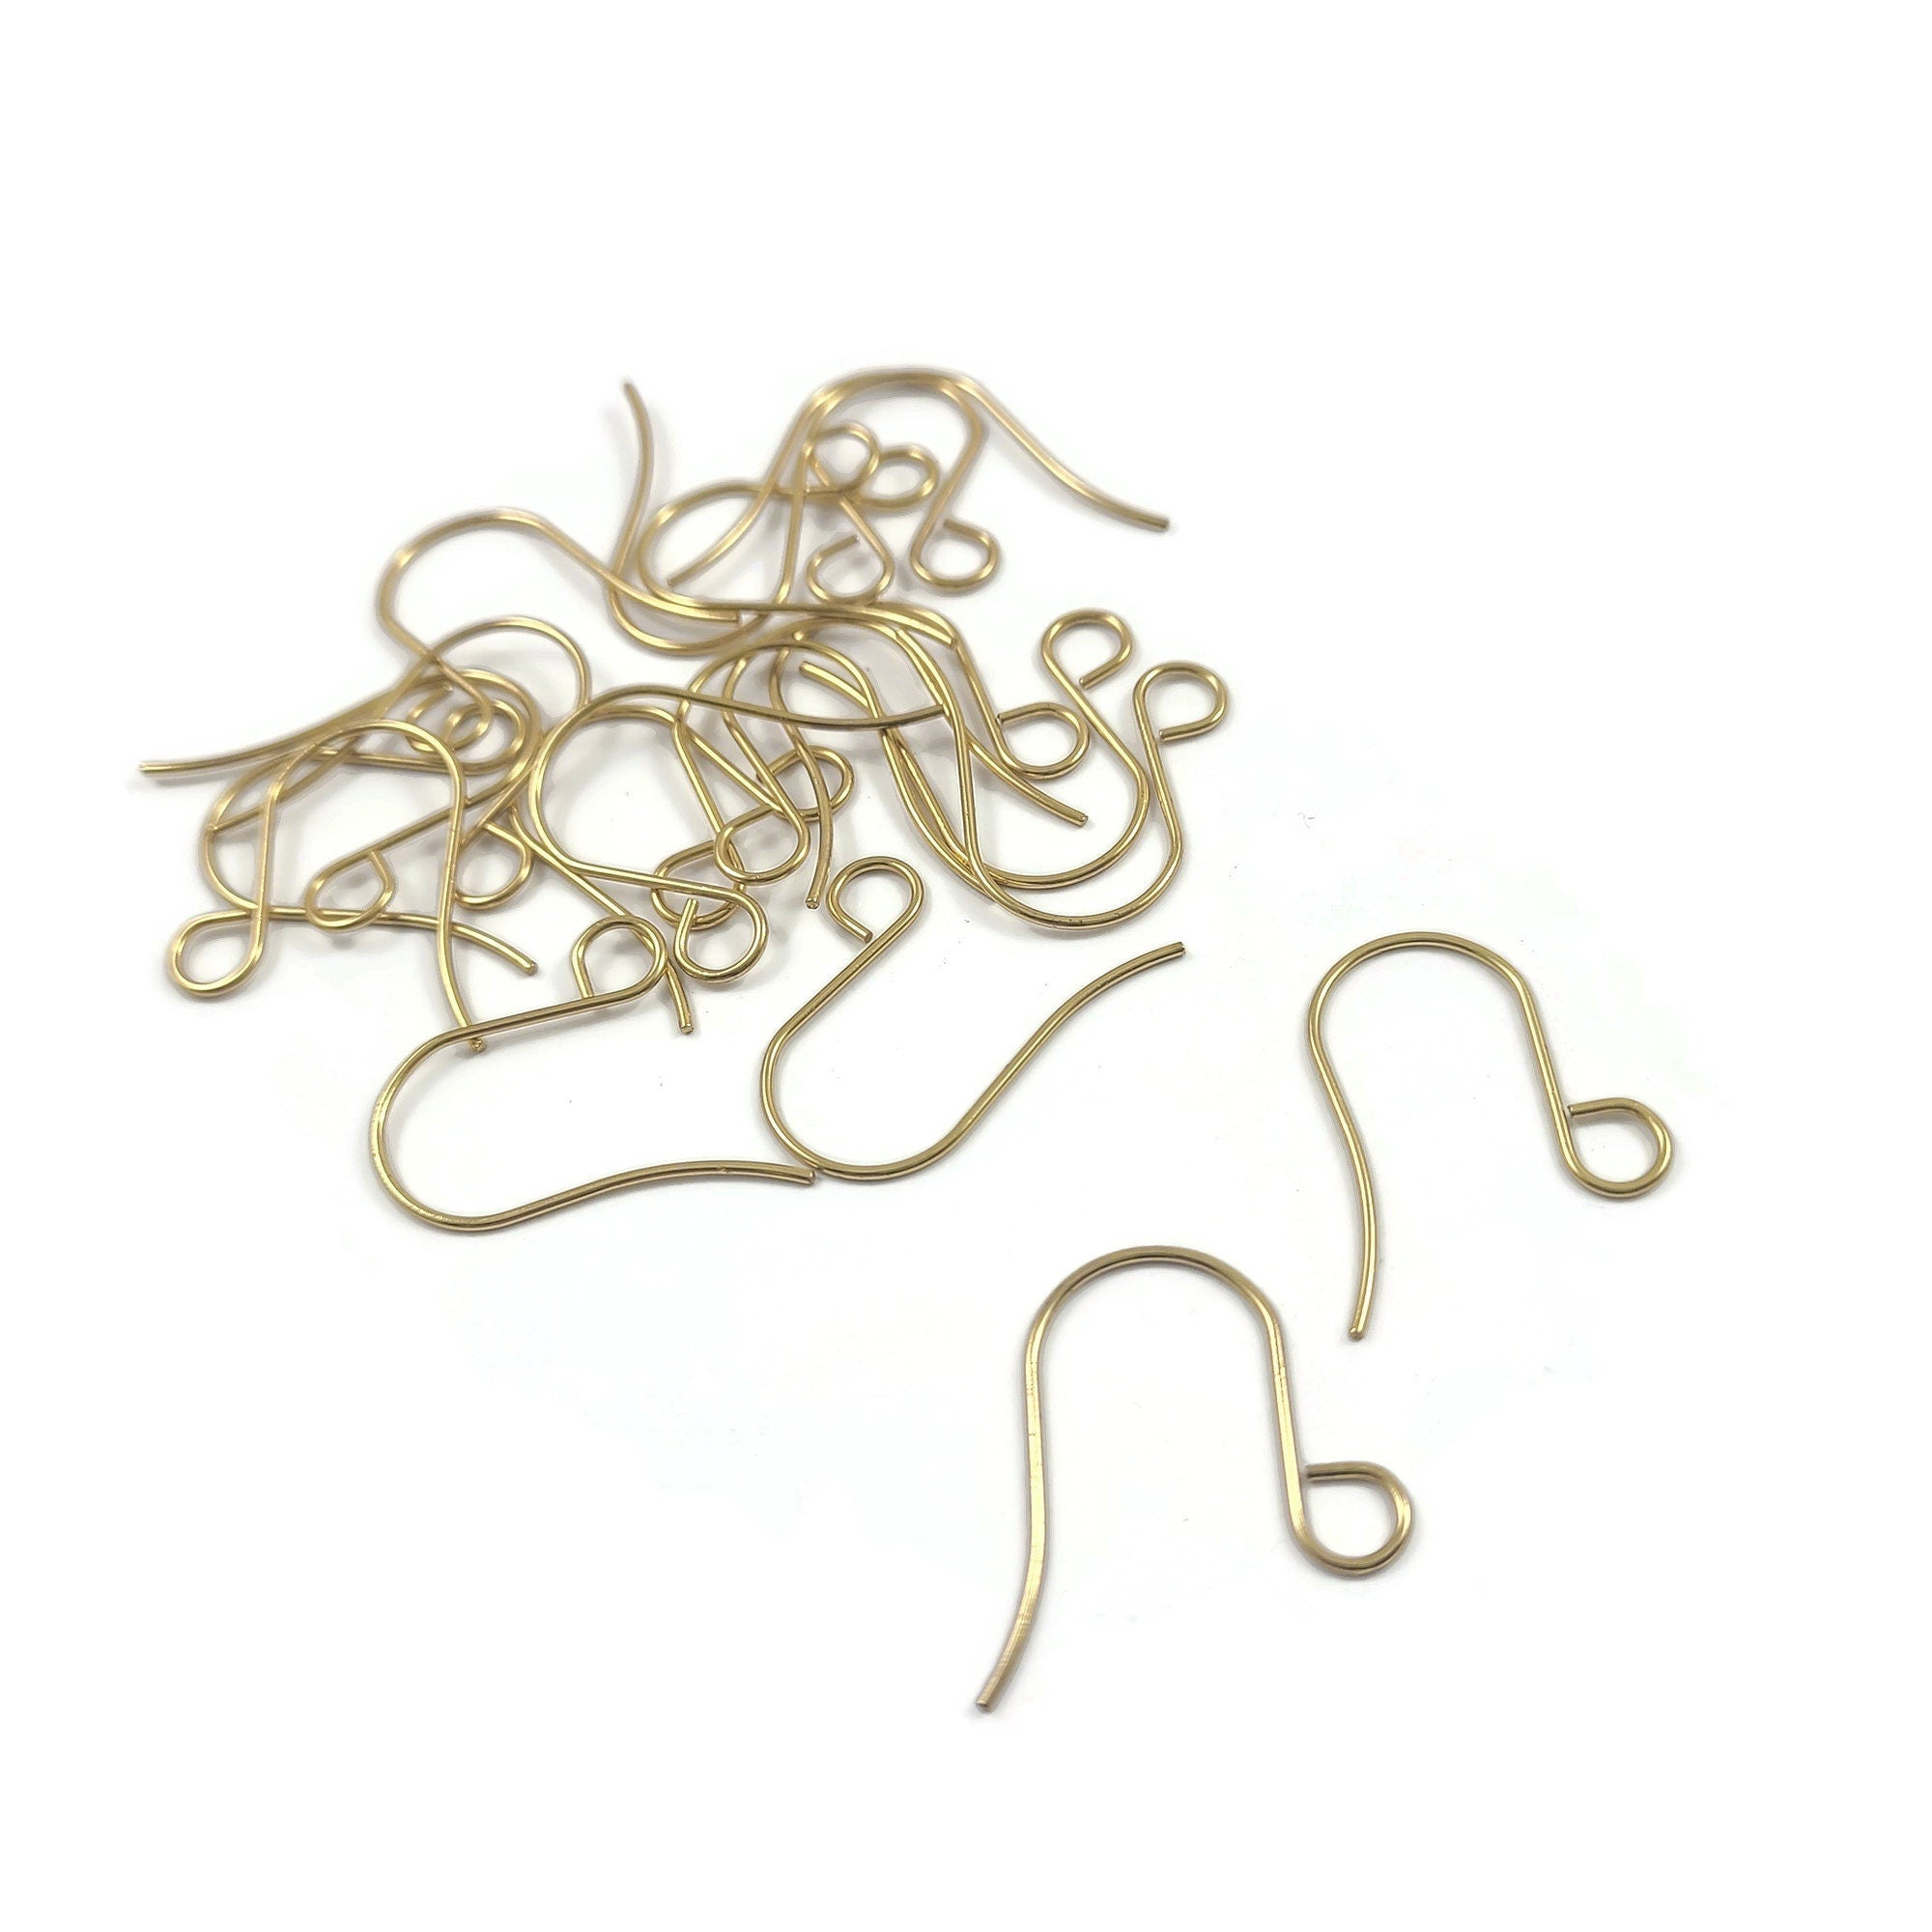 316 Surgical stainless steel ear wire, Flat french earring hooks